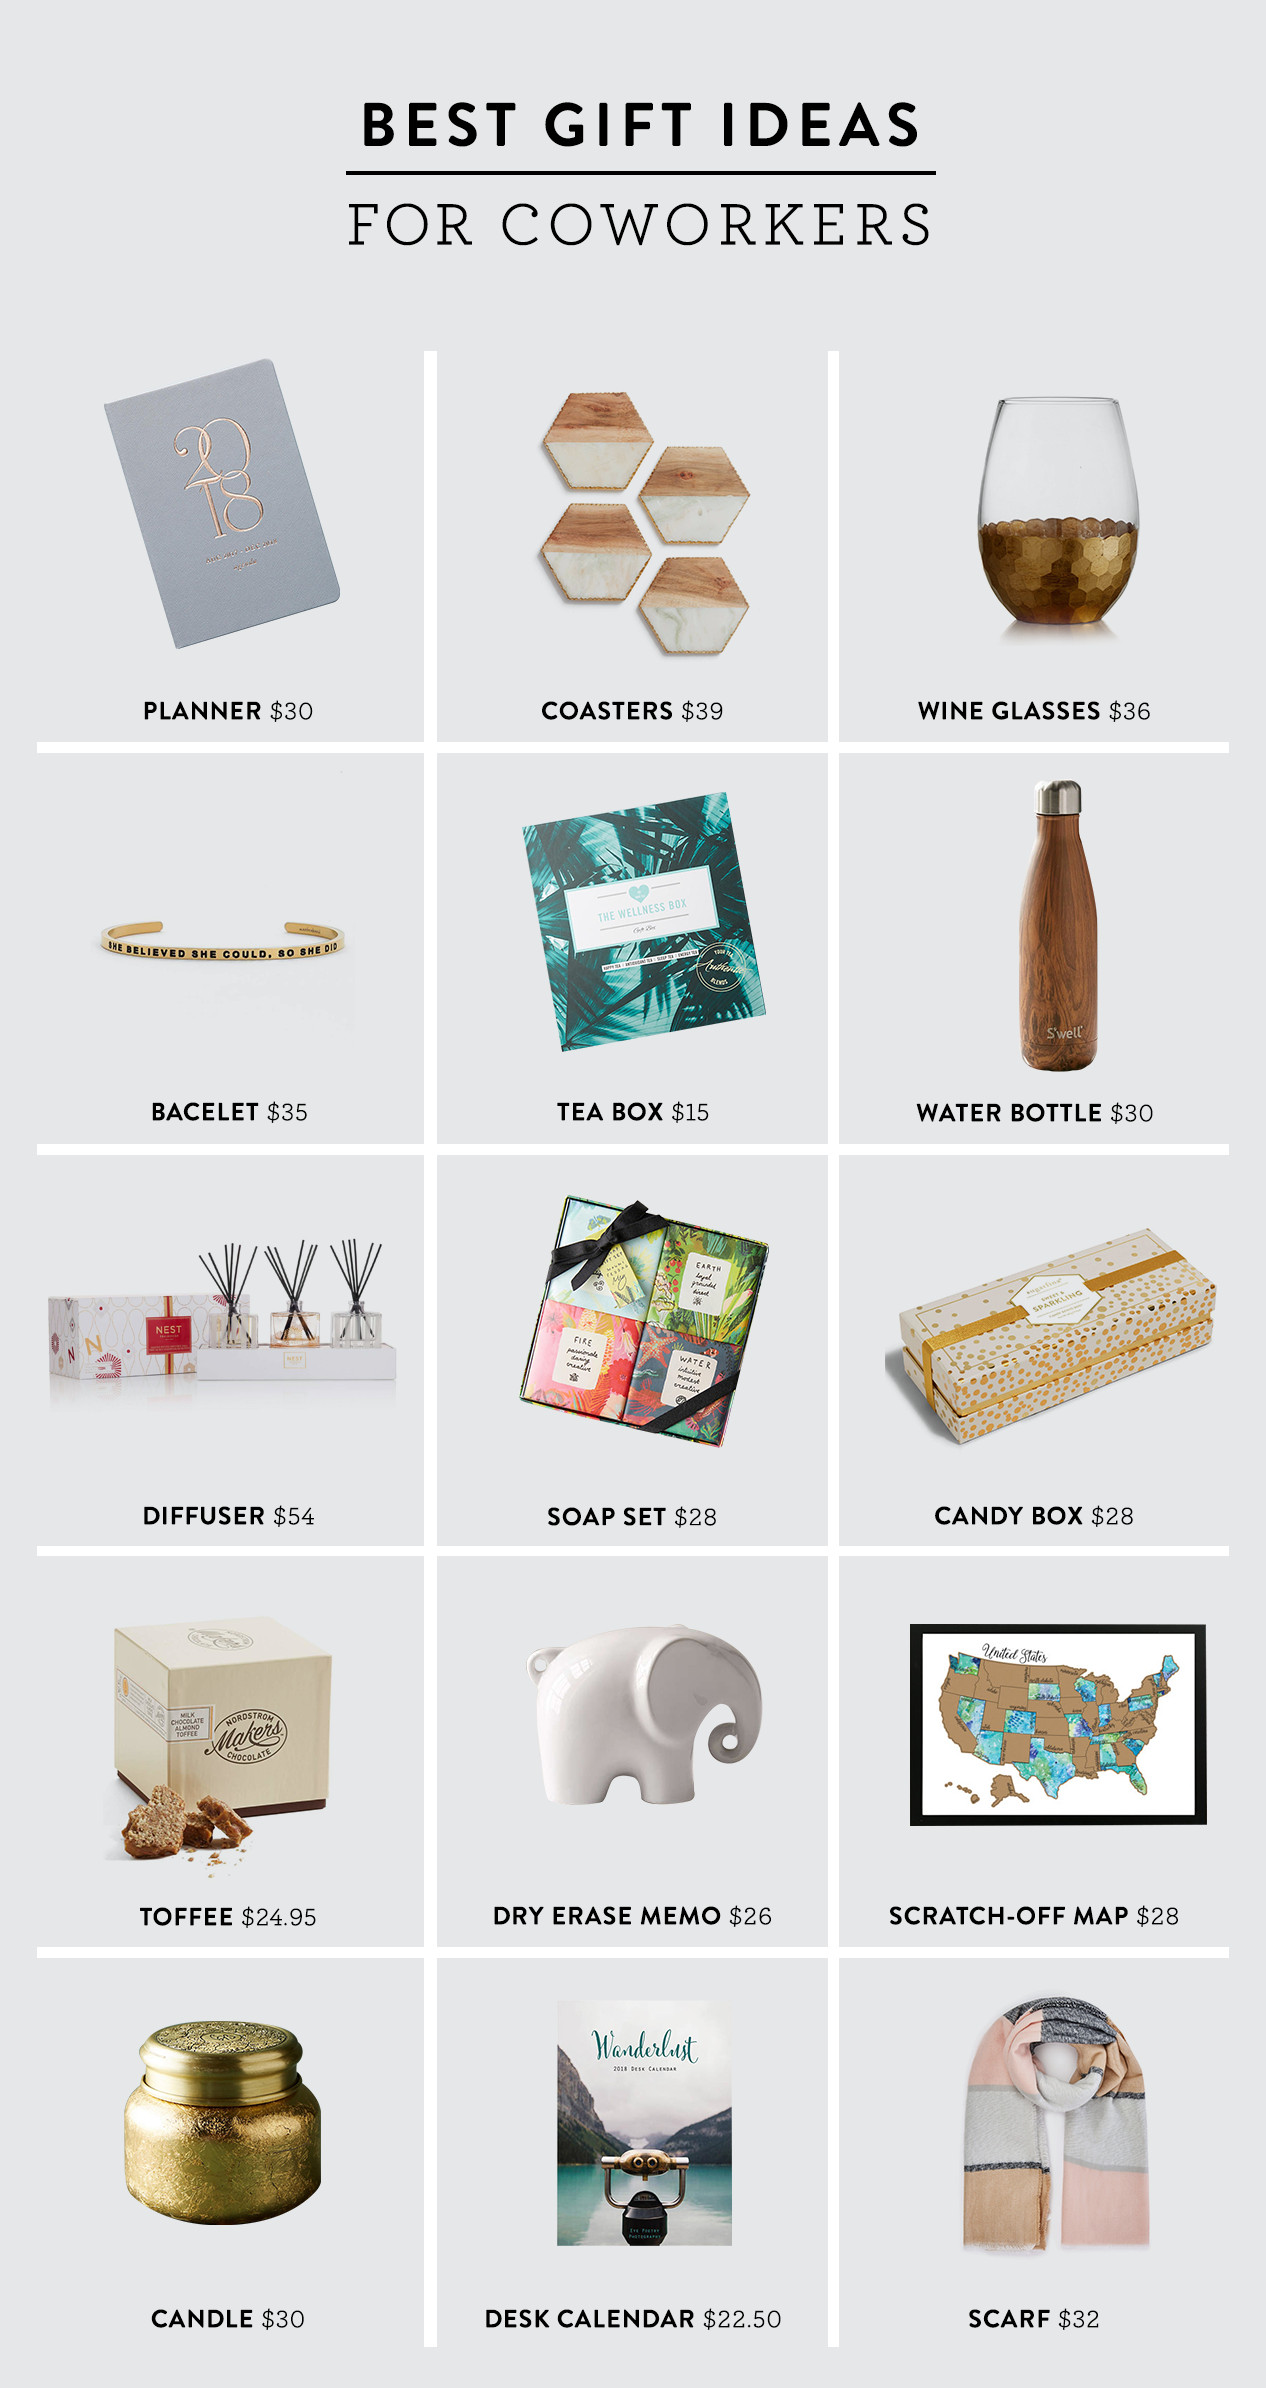 Best Gift Ideas For Coworkers
 Best Gift Ideas for Coworkers